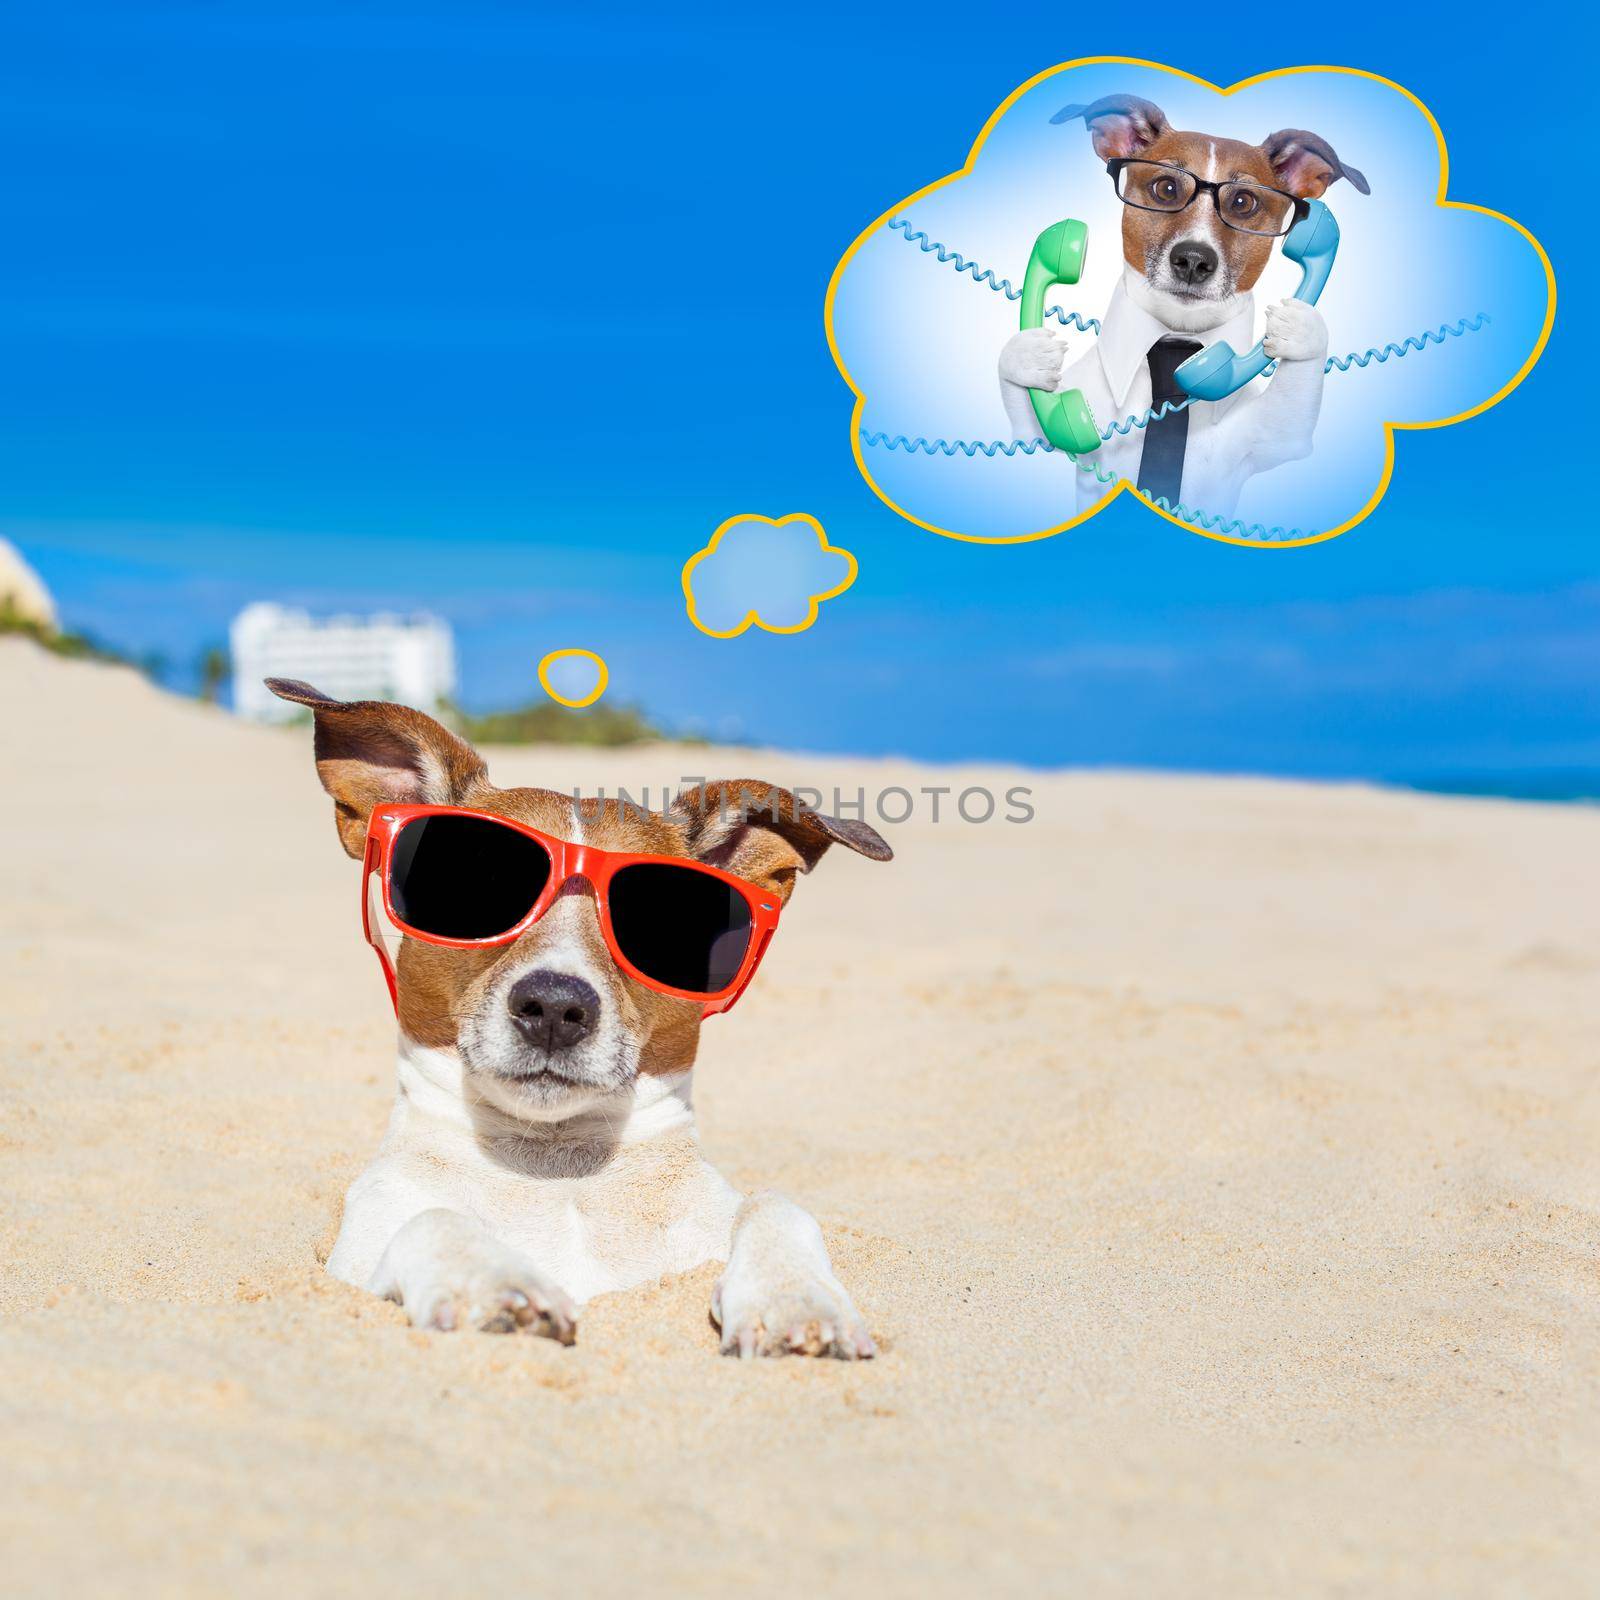 jack russell dog  buried in the sand at the beach on summer vacation holidays , wearing red sunglasses thinking of work